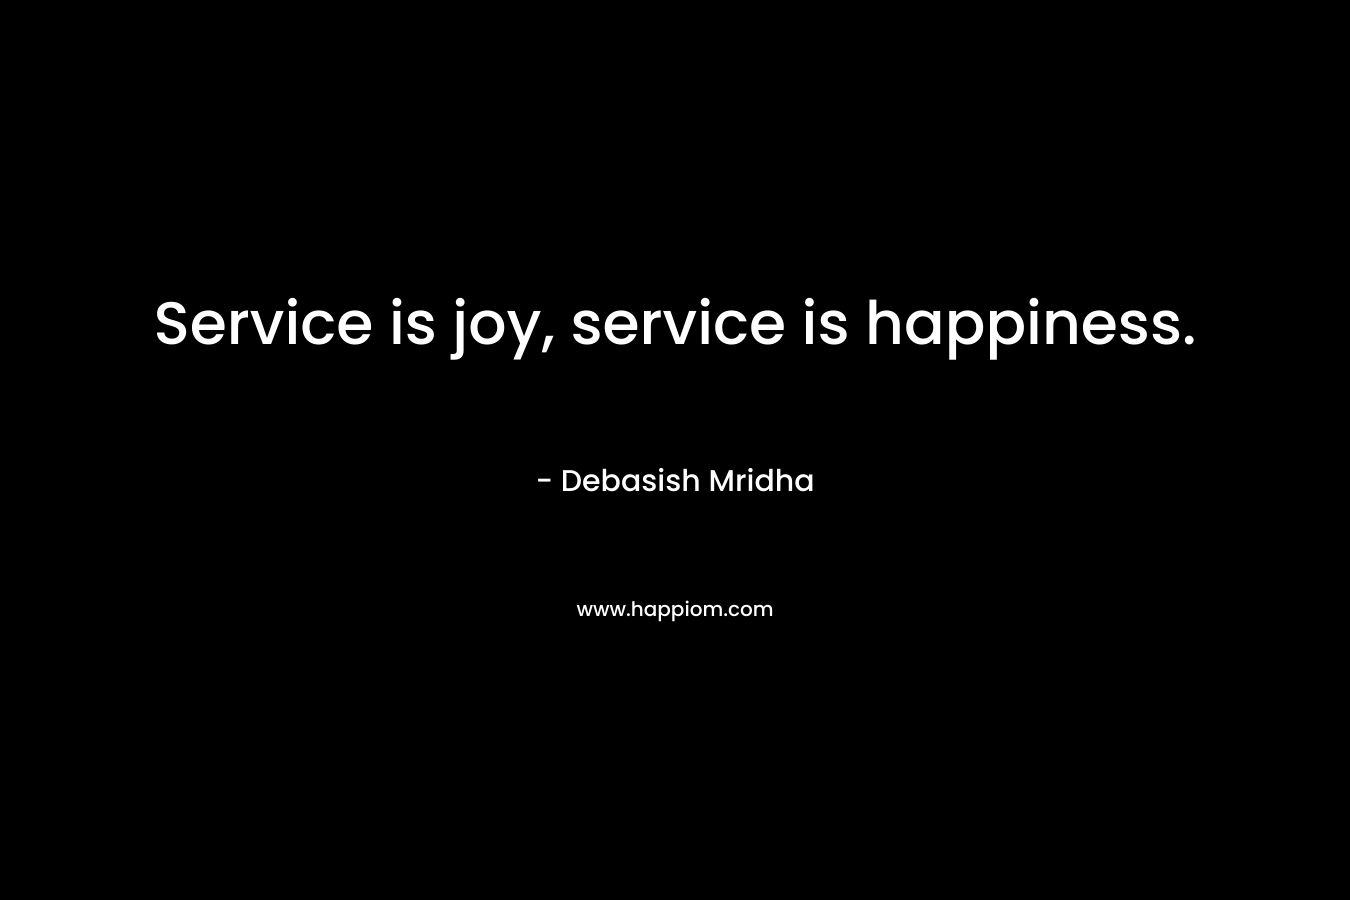 Service is joy, service is happiness.